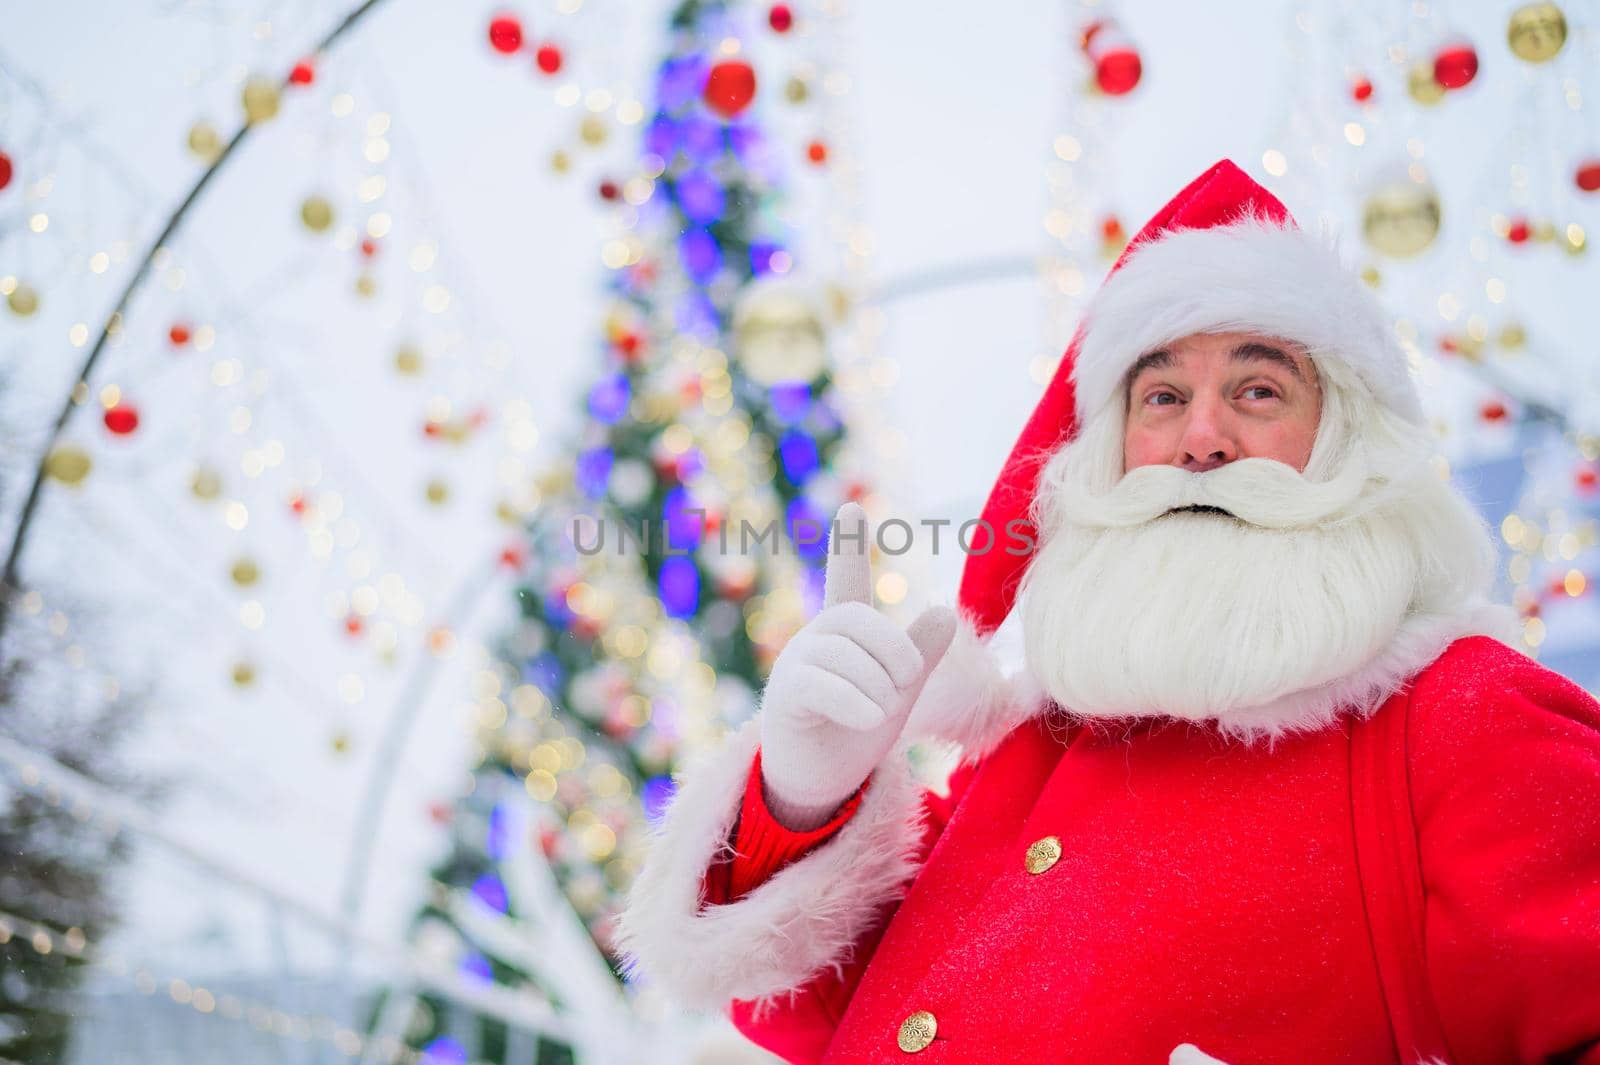 Portrait of an elderly man dressed as santa claus on the background of a christmas tree outdoors